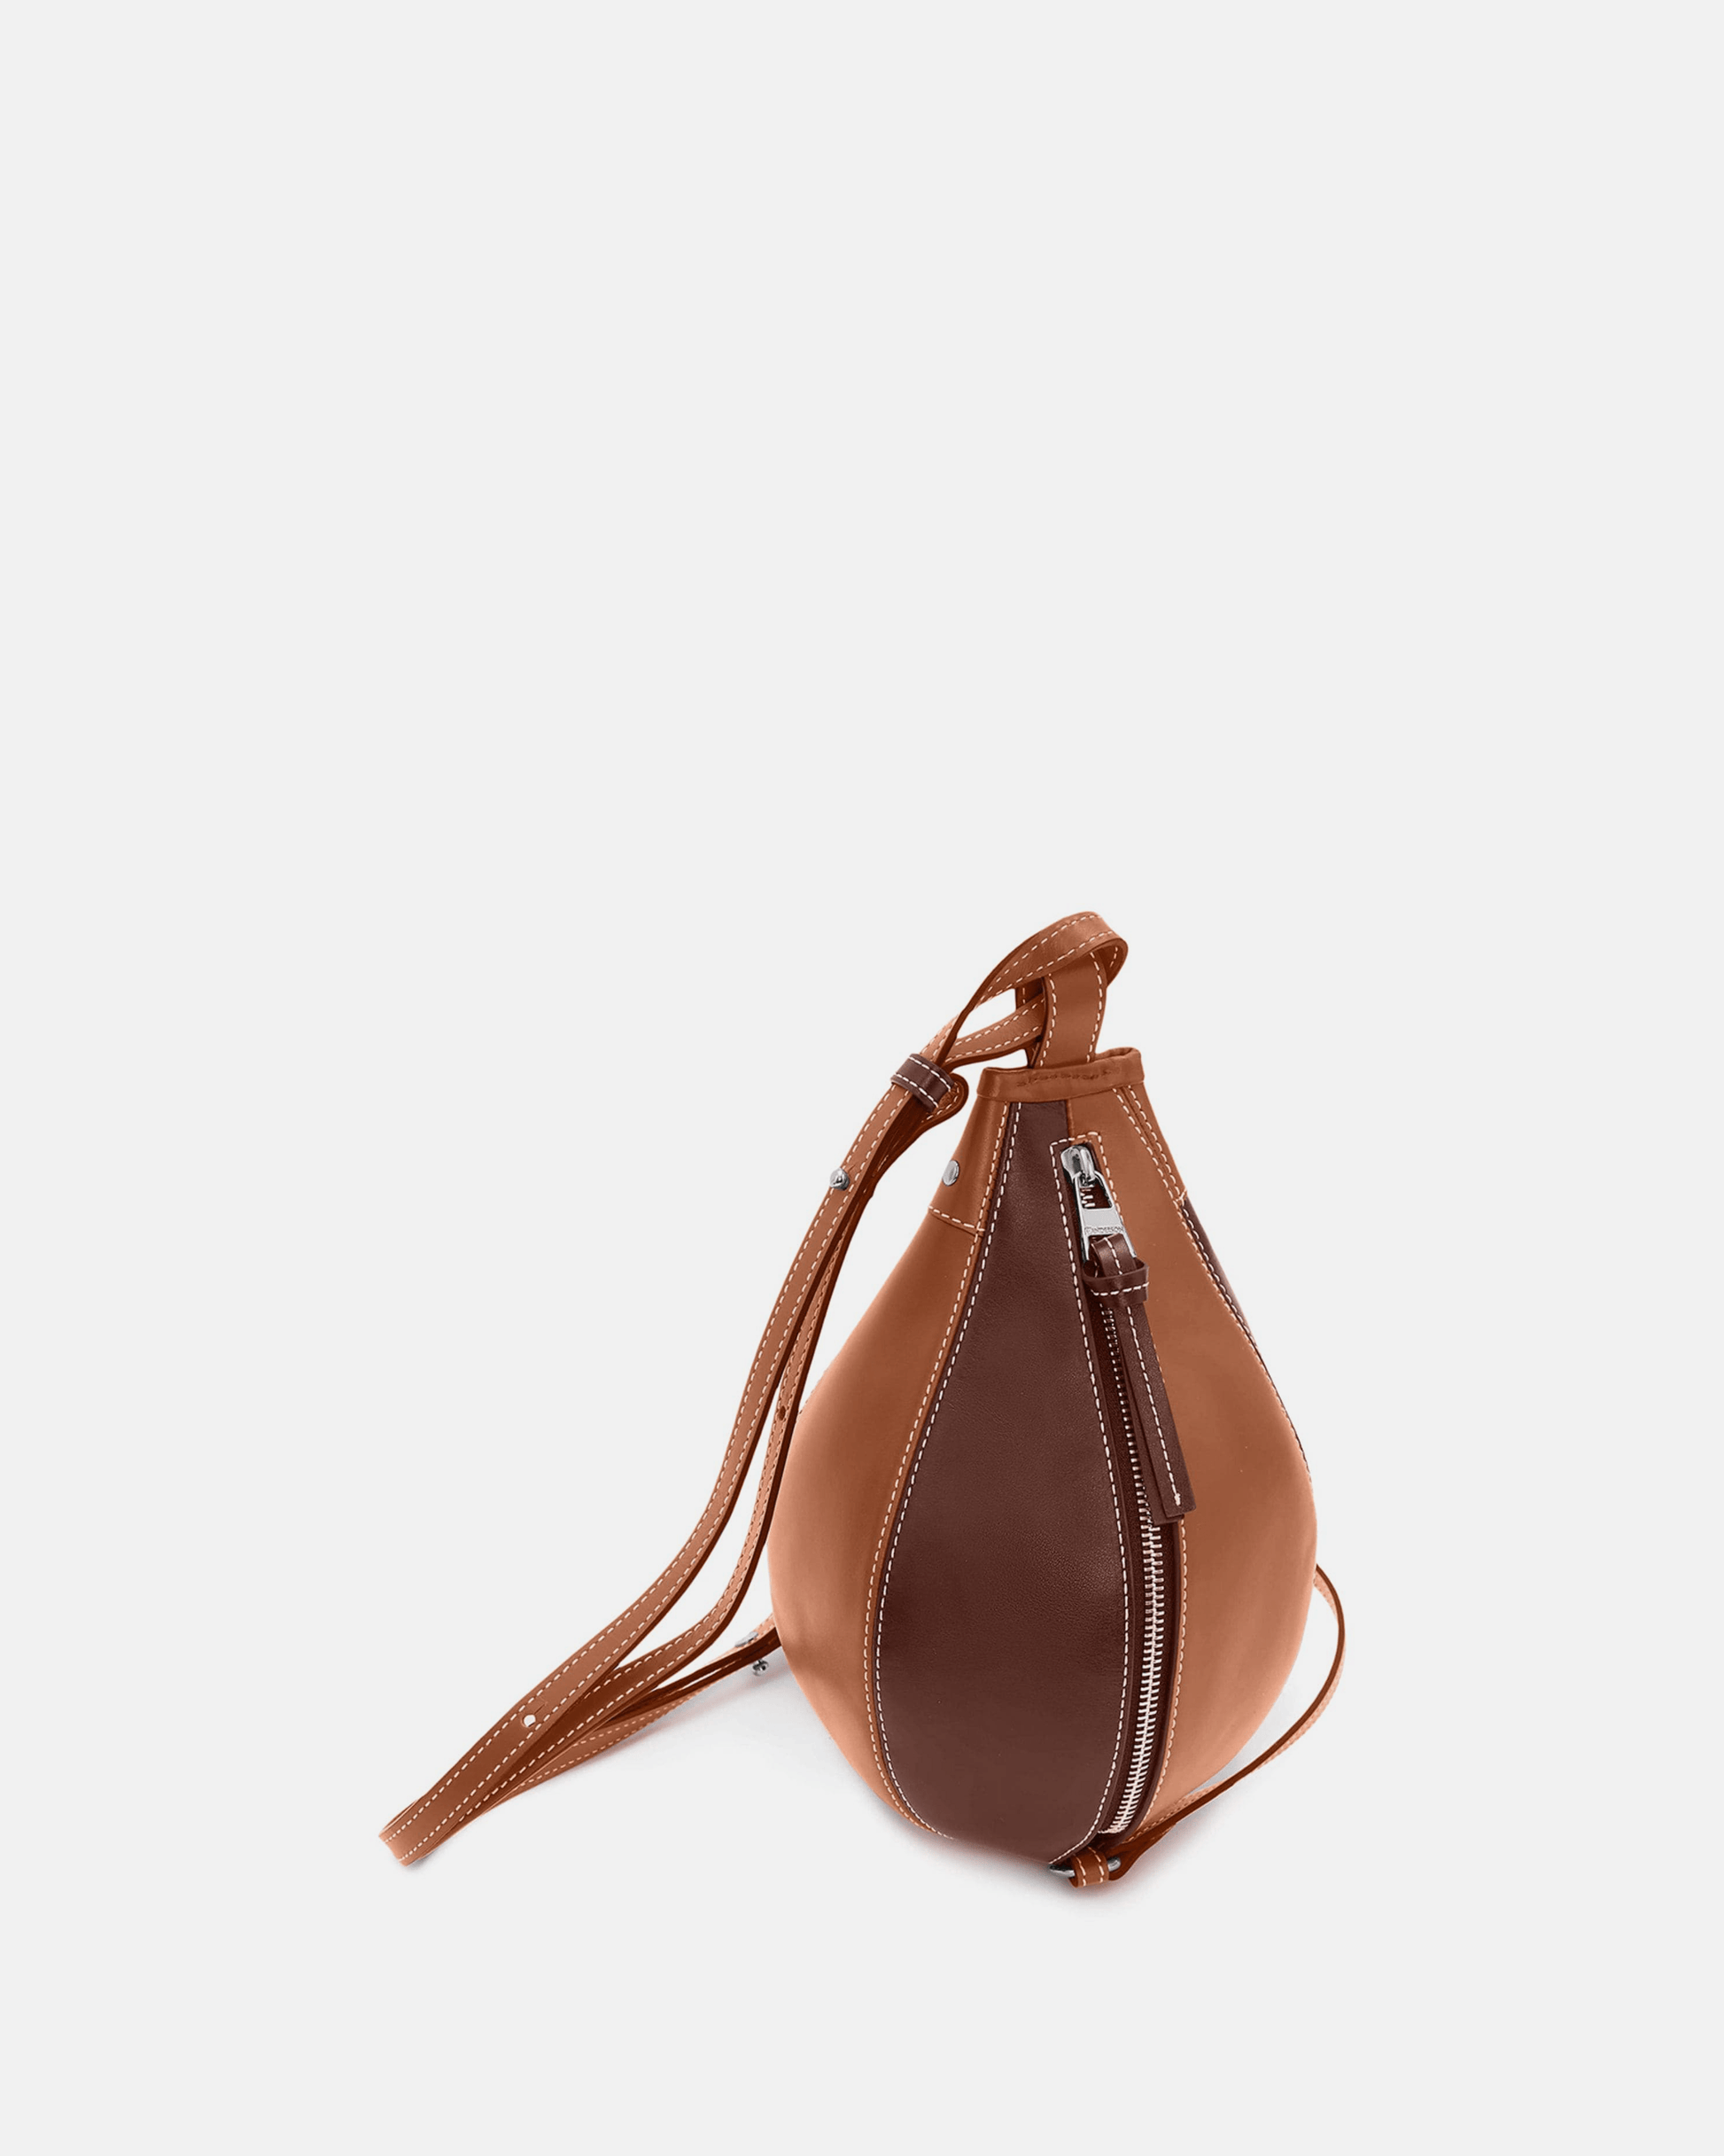 JW Anderson Men's Bags Small Punch Bag in Pecan